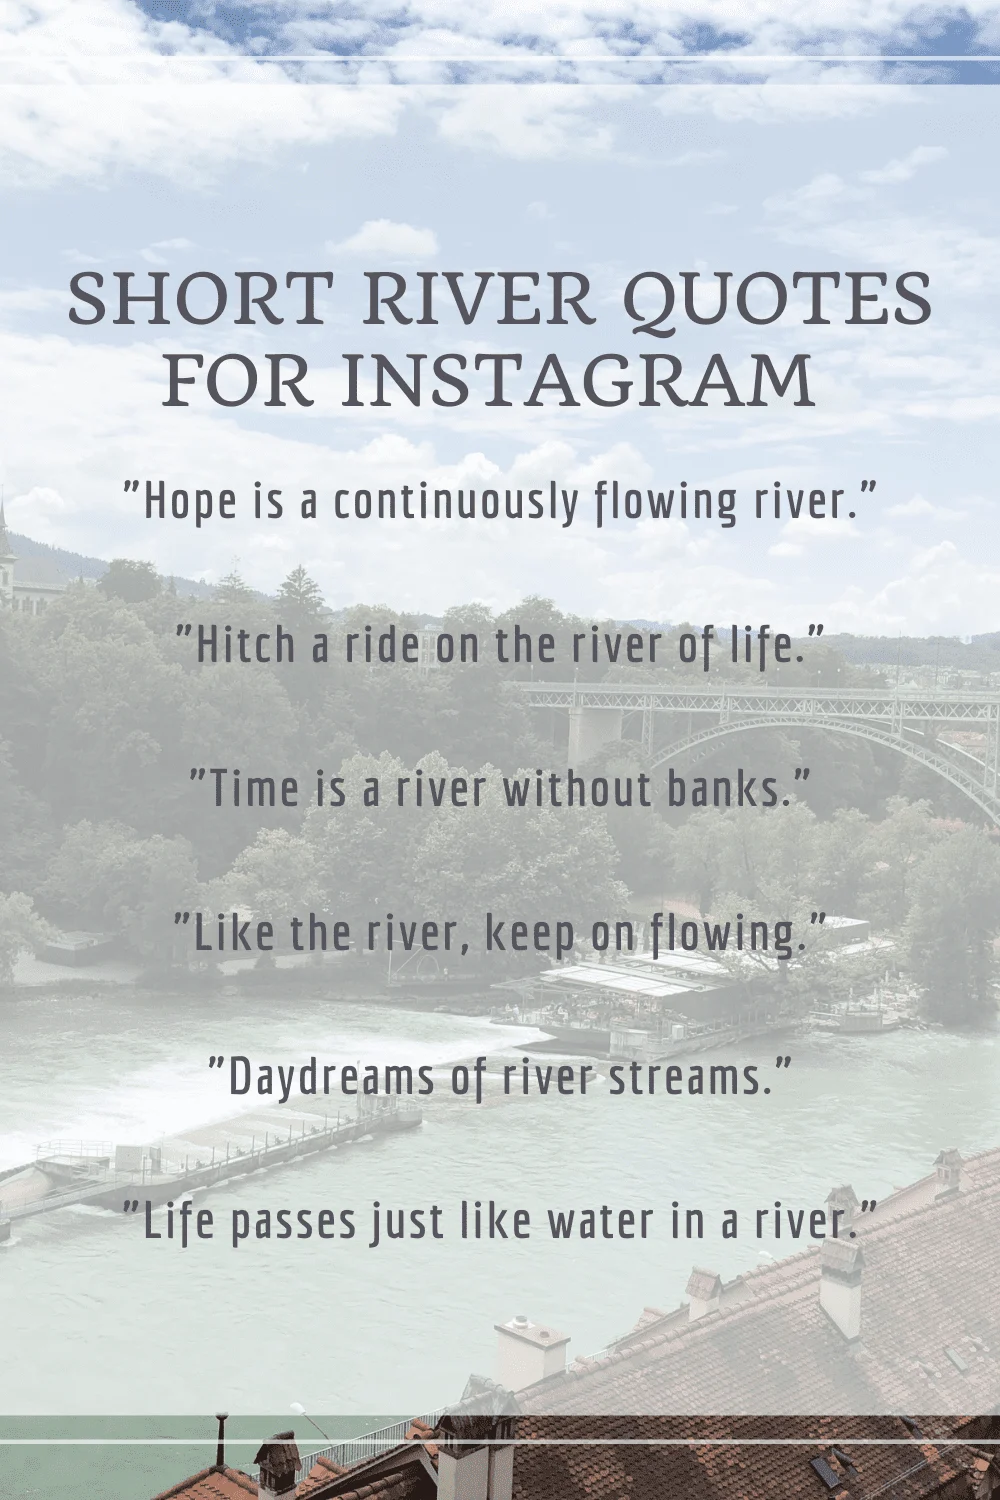 Short River Quotes for Instagram